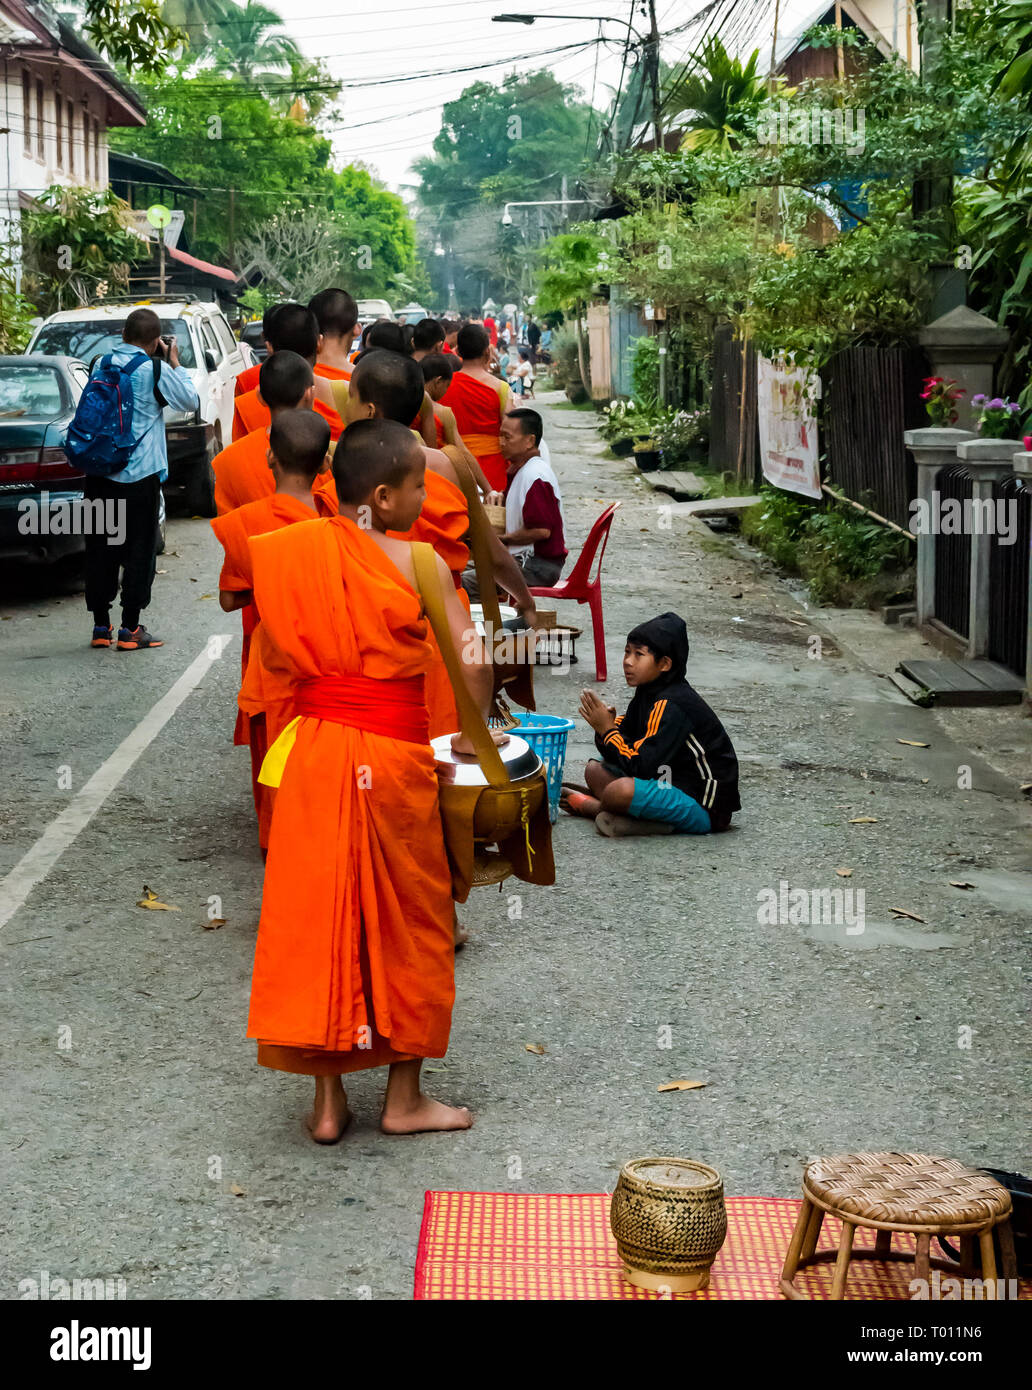 Buddhist monks in orange robes queue for morning alms giving ceremony with local poor boy collecting extra rice for his village, Luang Prabang, Laos Stock Photo